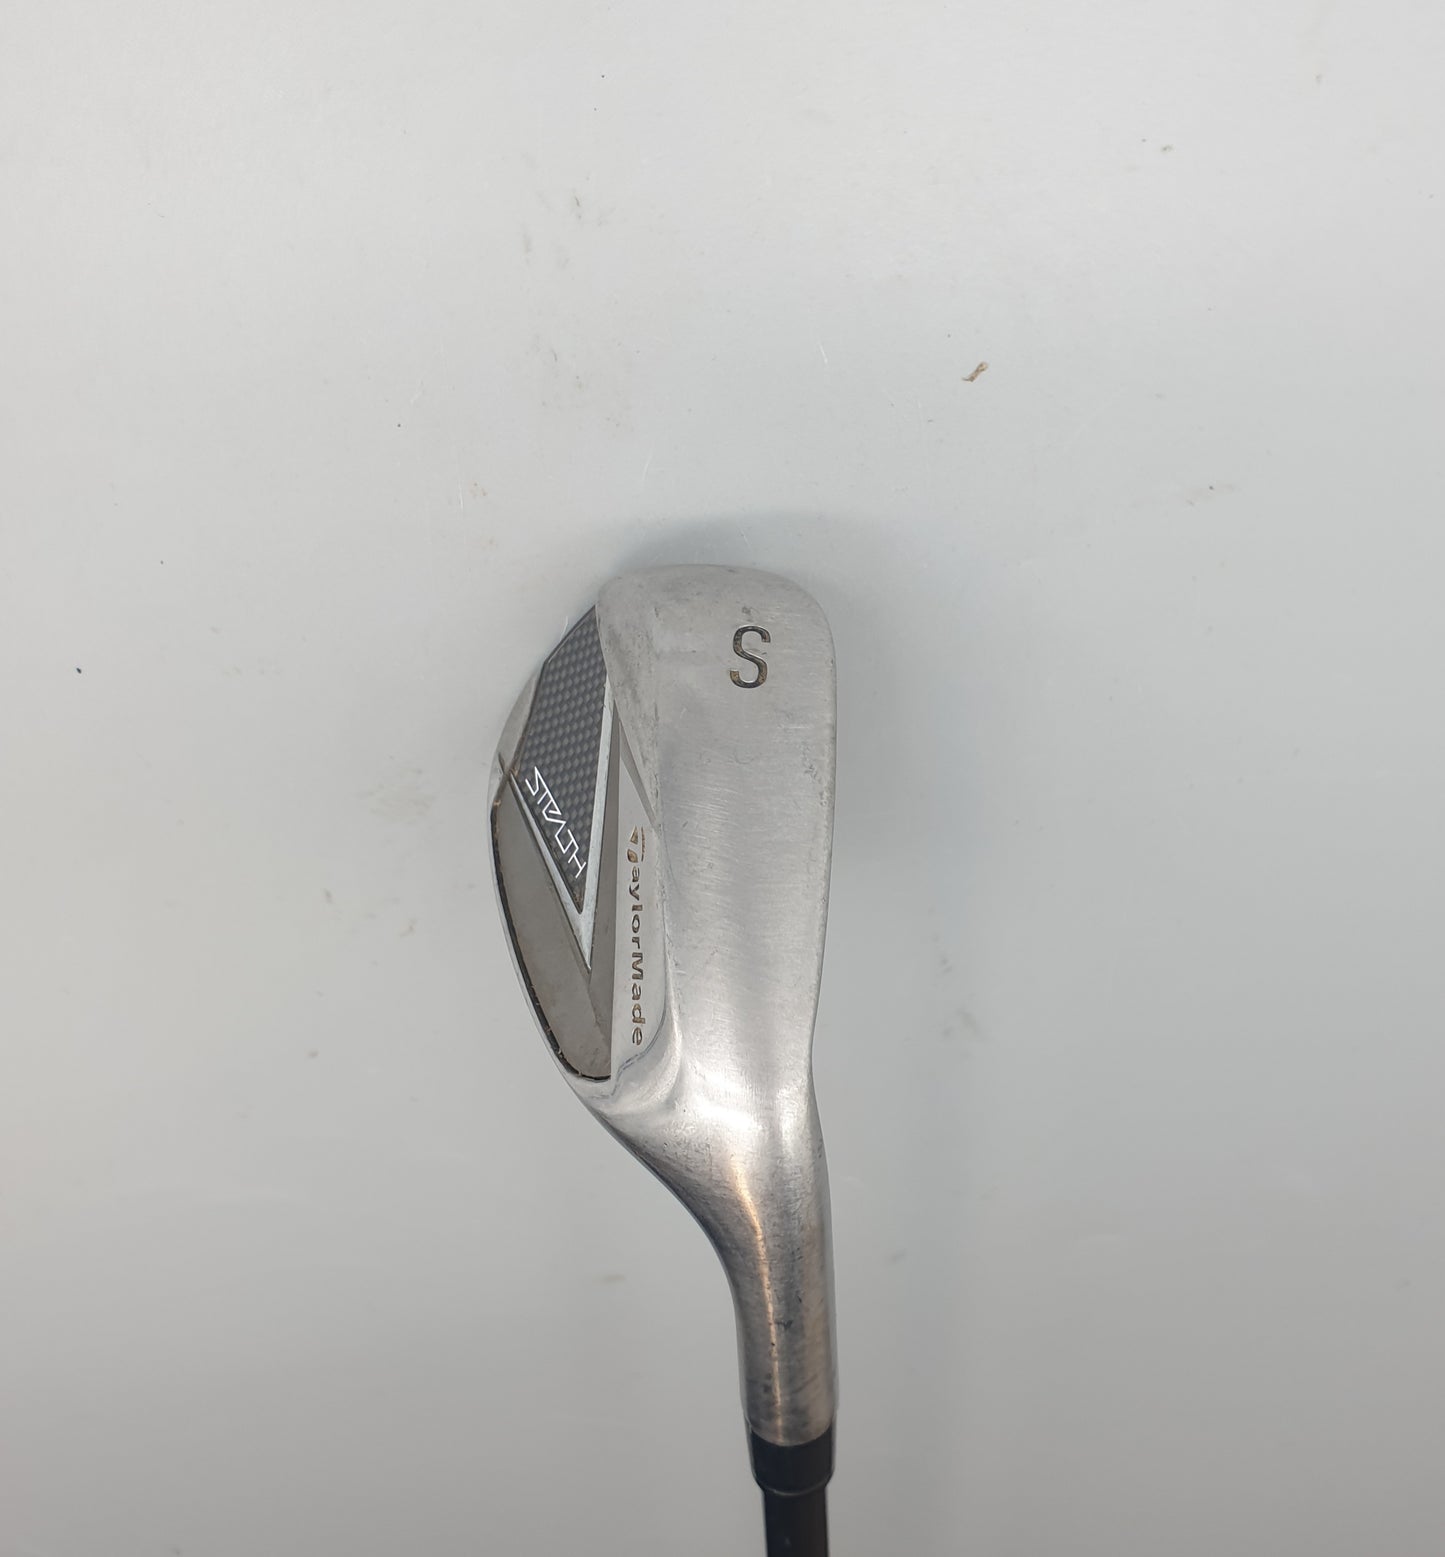 Taylormade Stealth Sand Wedge Ventus 6-R Right Hand - Used